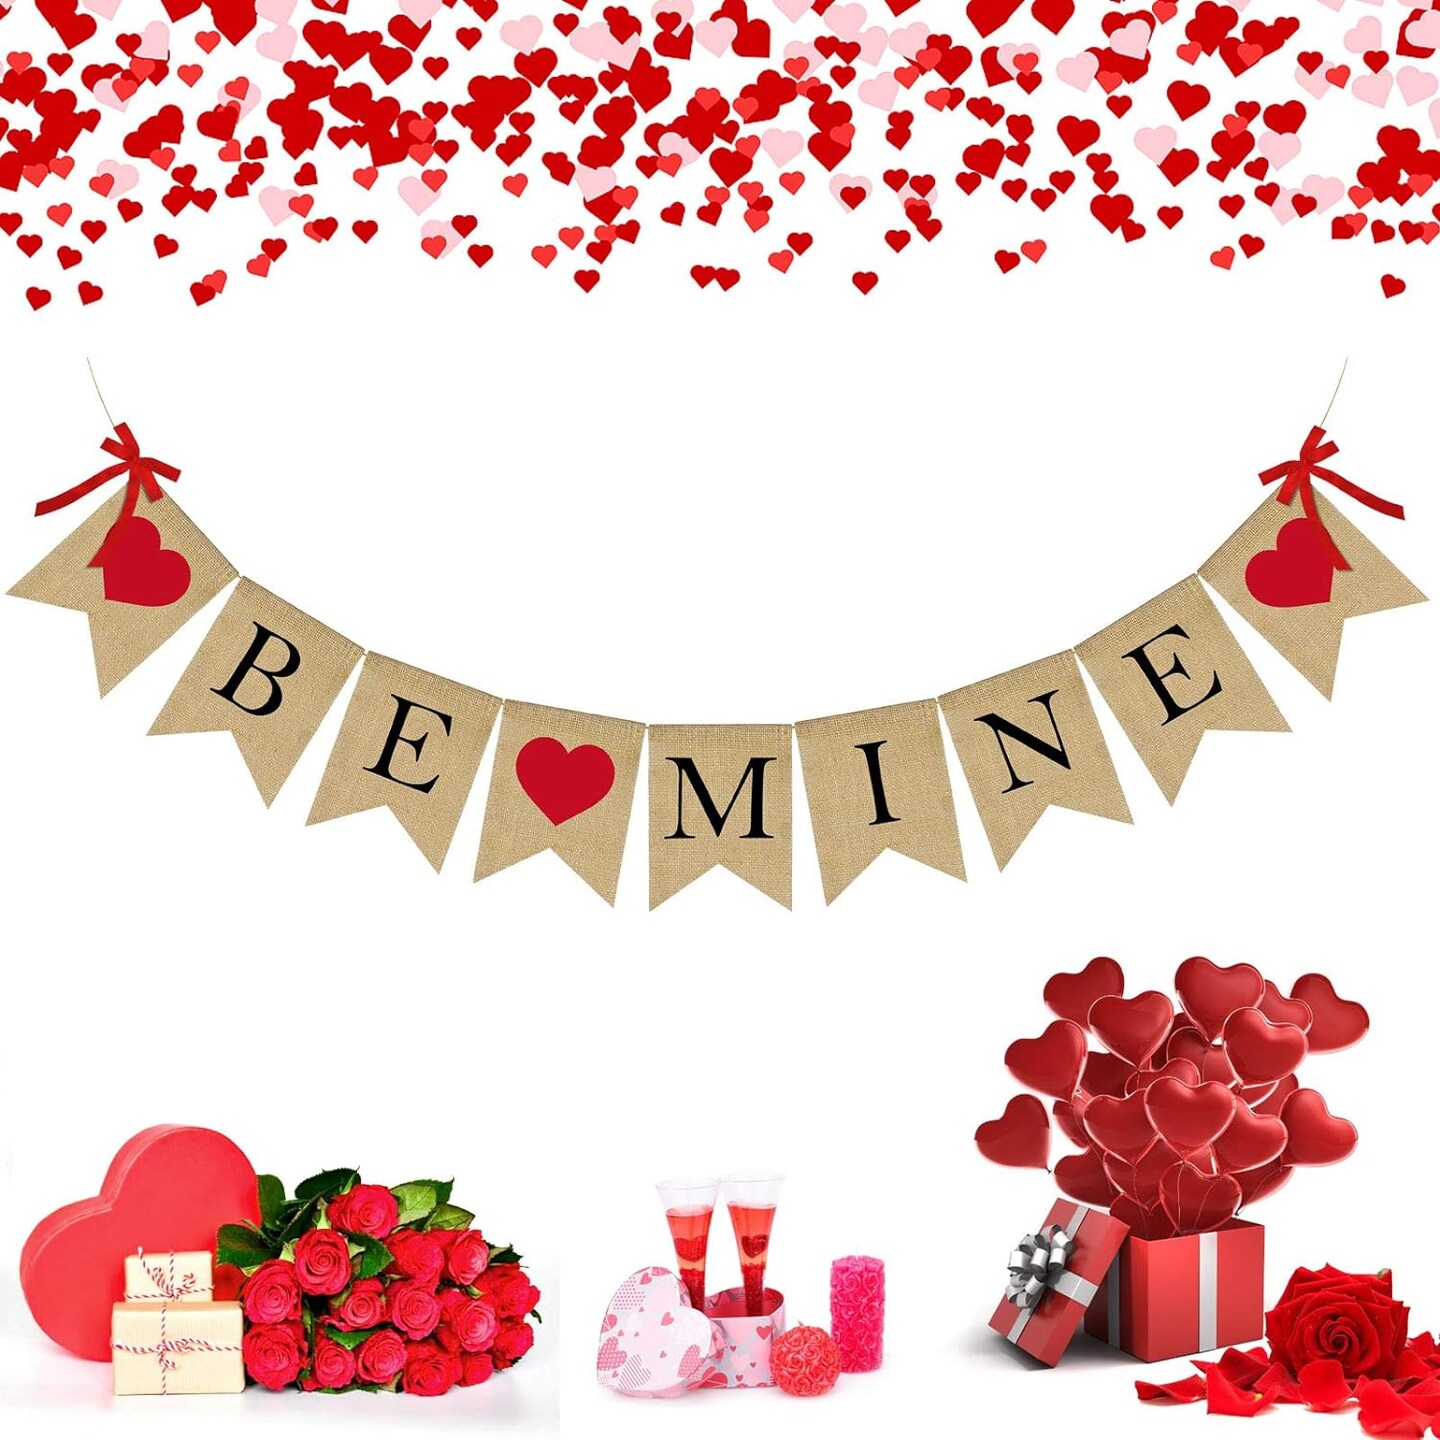 Be Mine Burlap Banner for Valentine Day Decorations, Wedding Anniversary Banner with Heart Sign Proposal Burlap Banner Wedding Party Anniversary Day Indoor/Outdoor Weeding Decorations Supplies